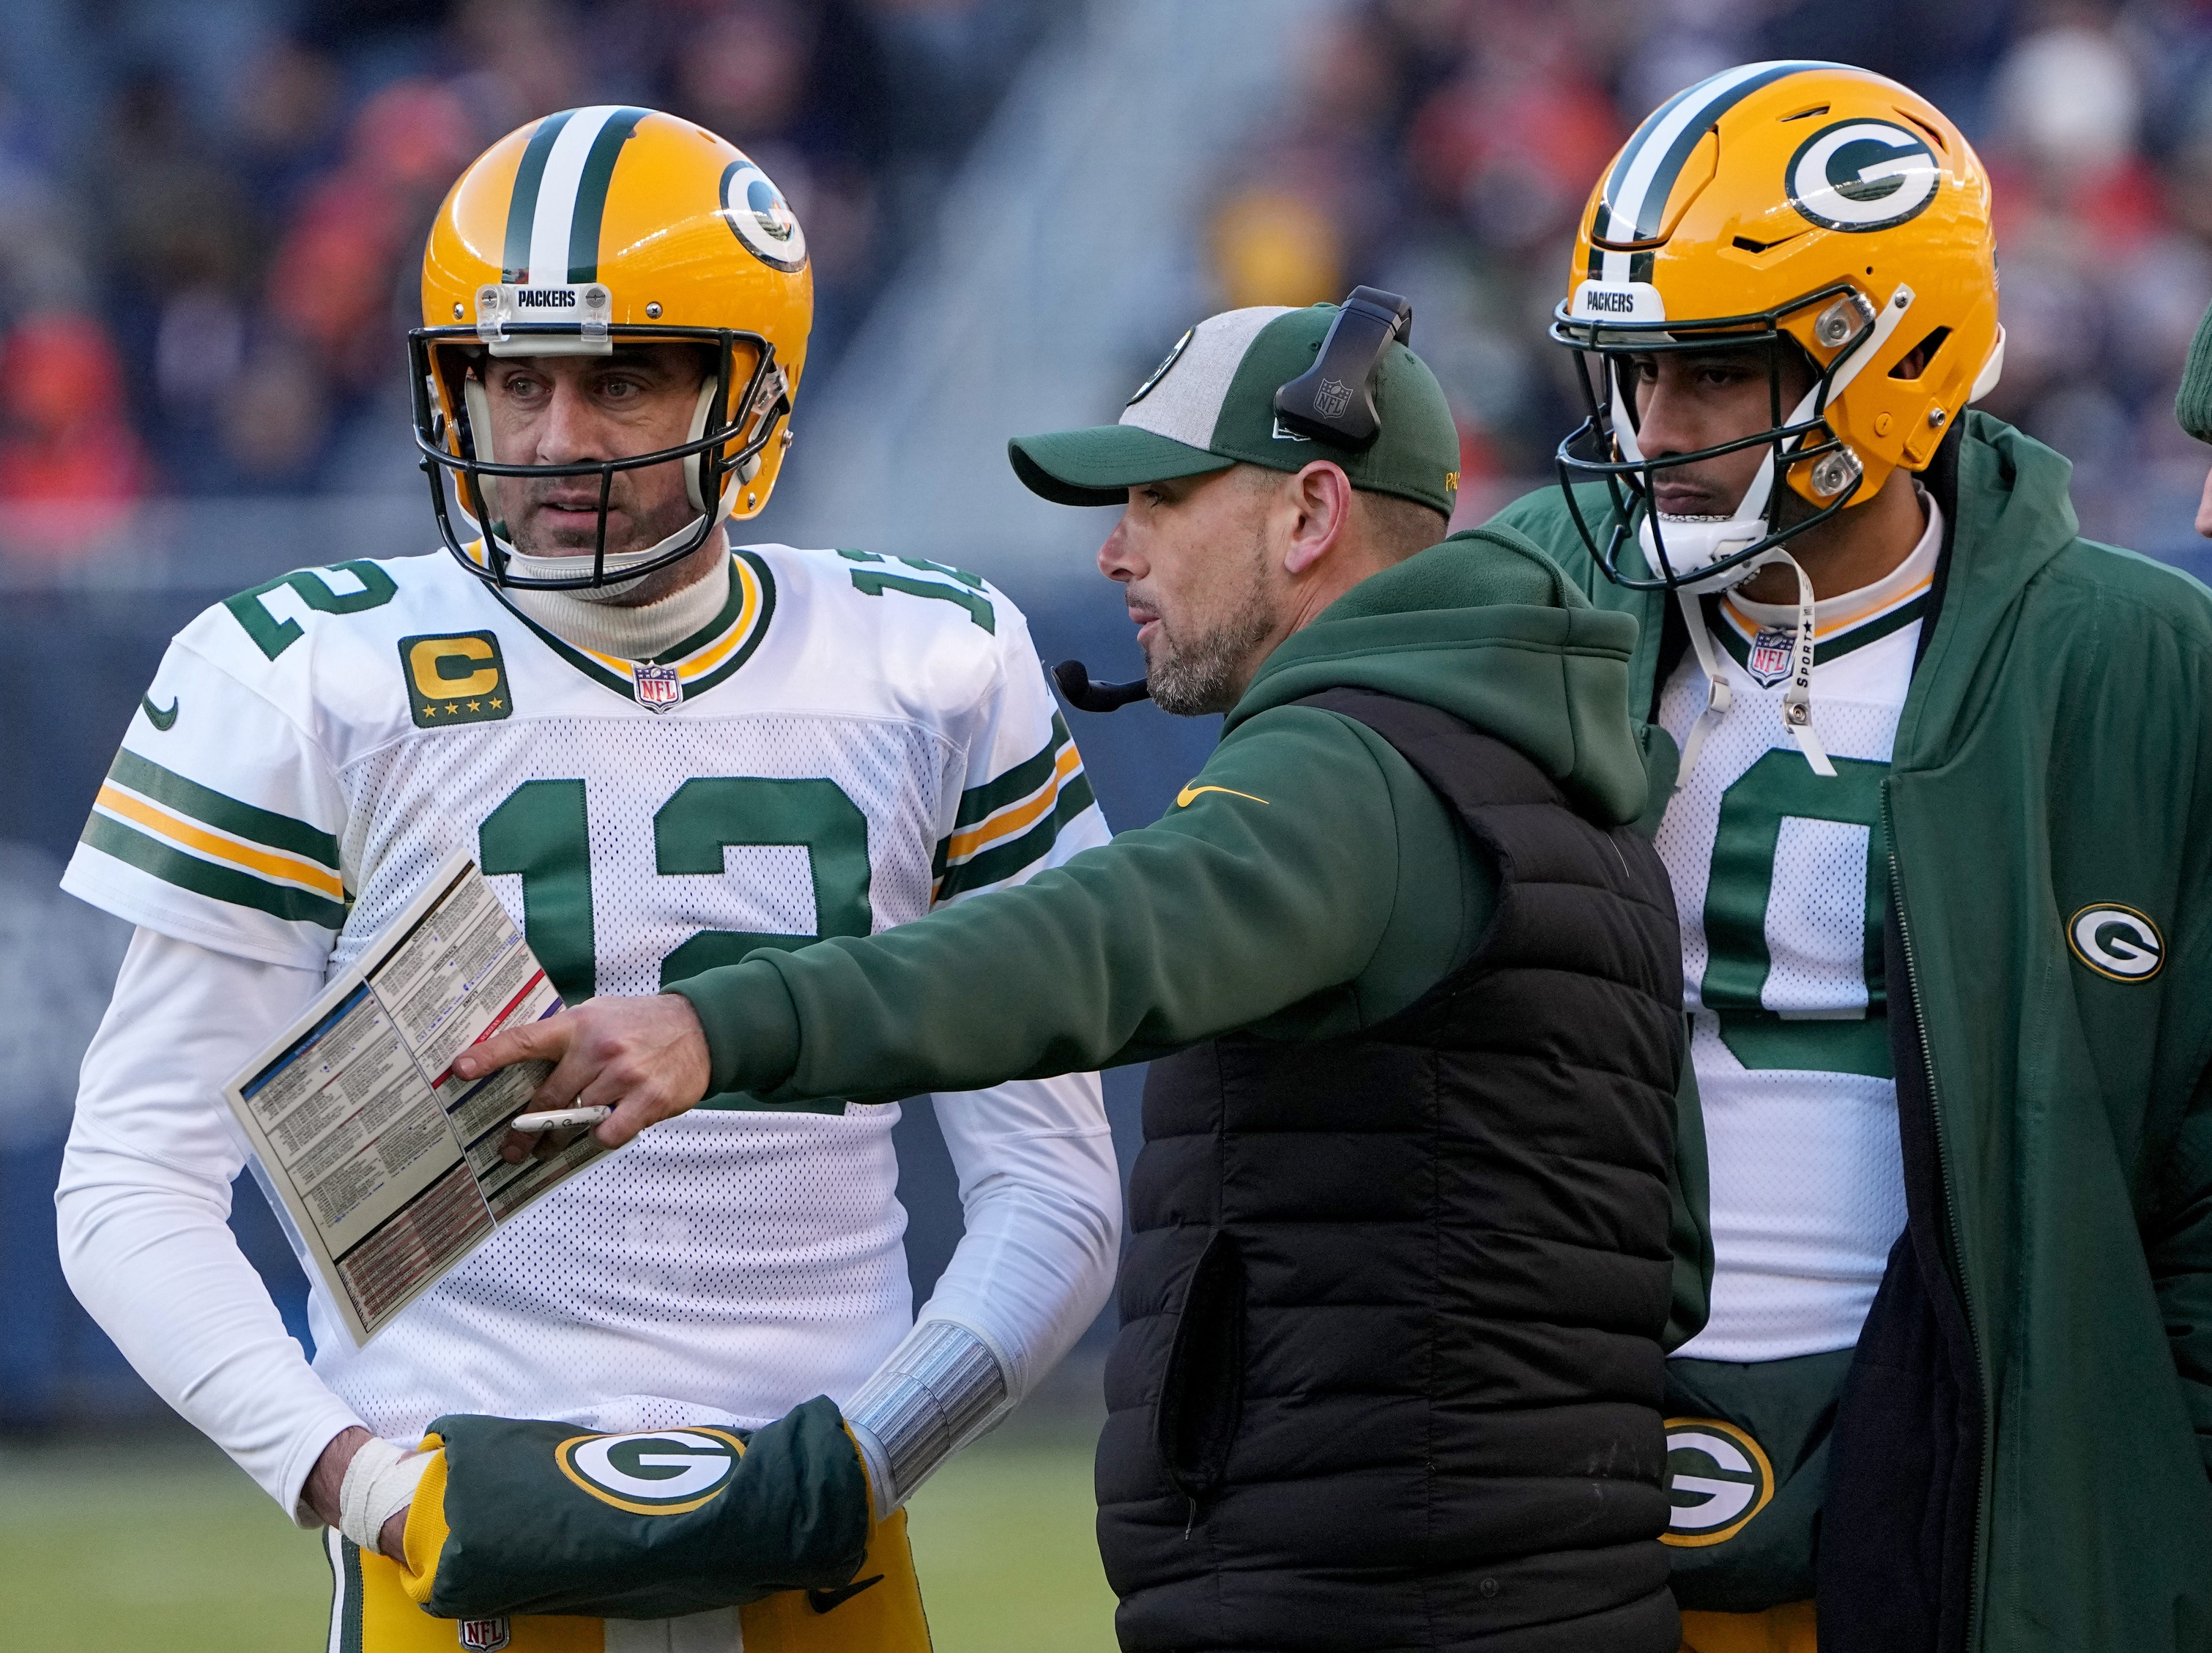 Bill Bender on Packers struggles and Badgers new head coach